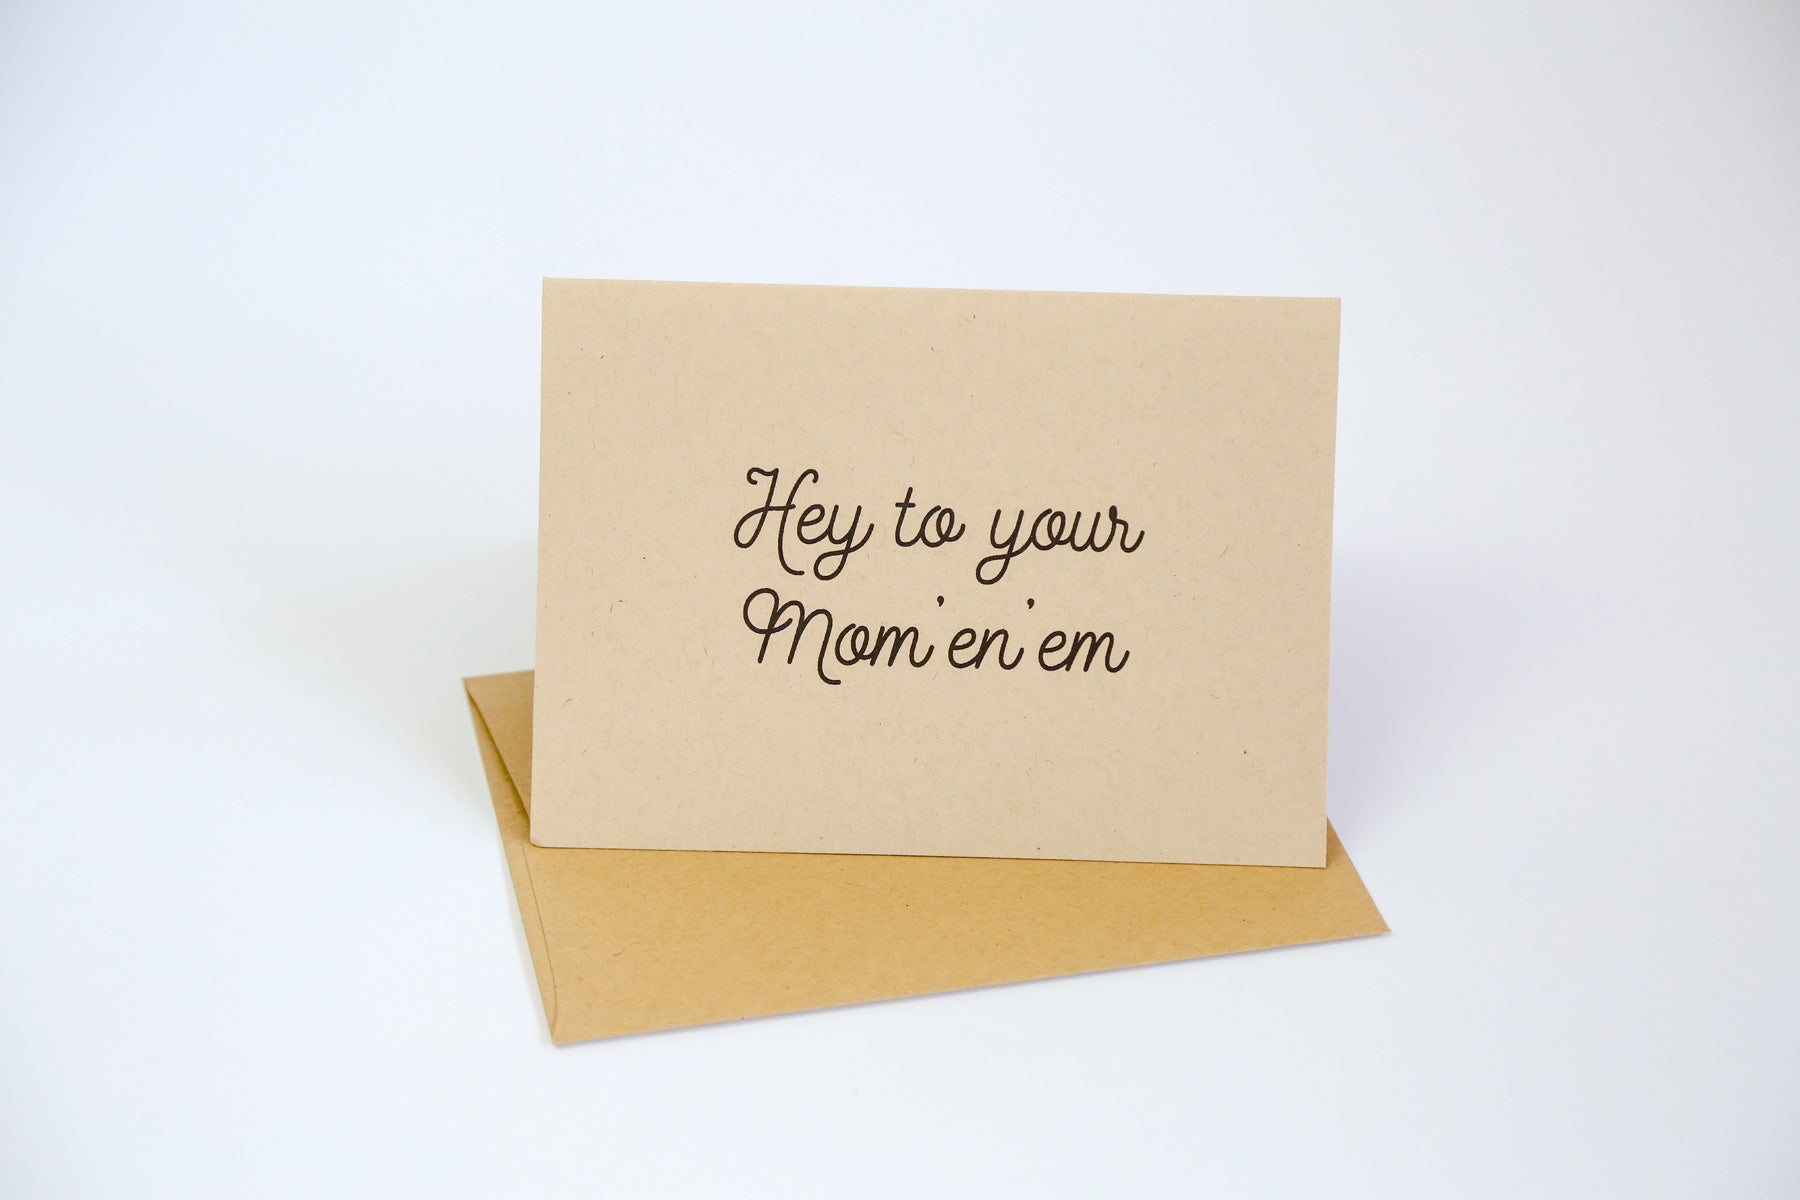 Hey to your mom-en-em - Greeting Card